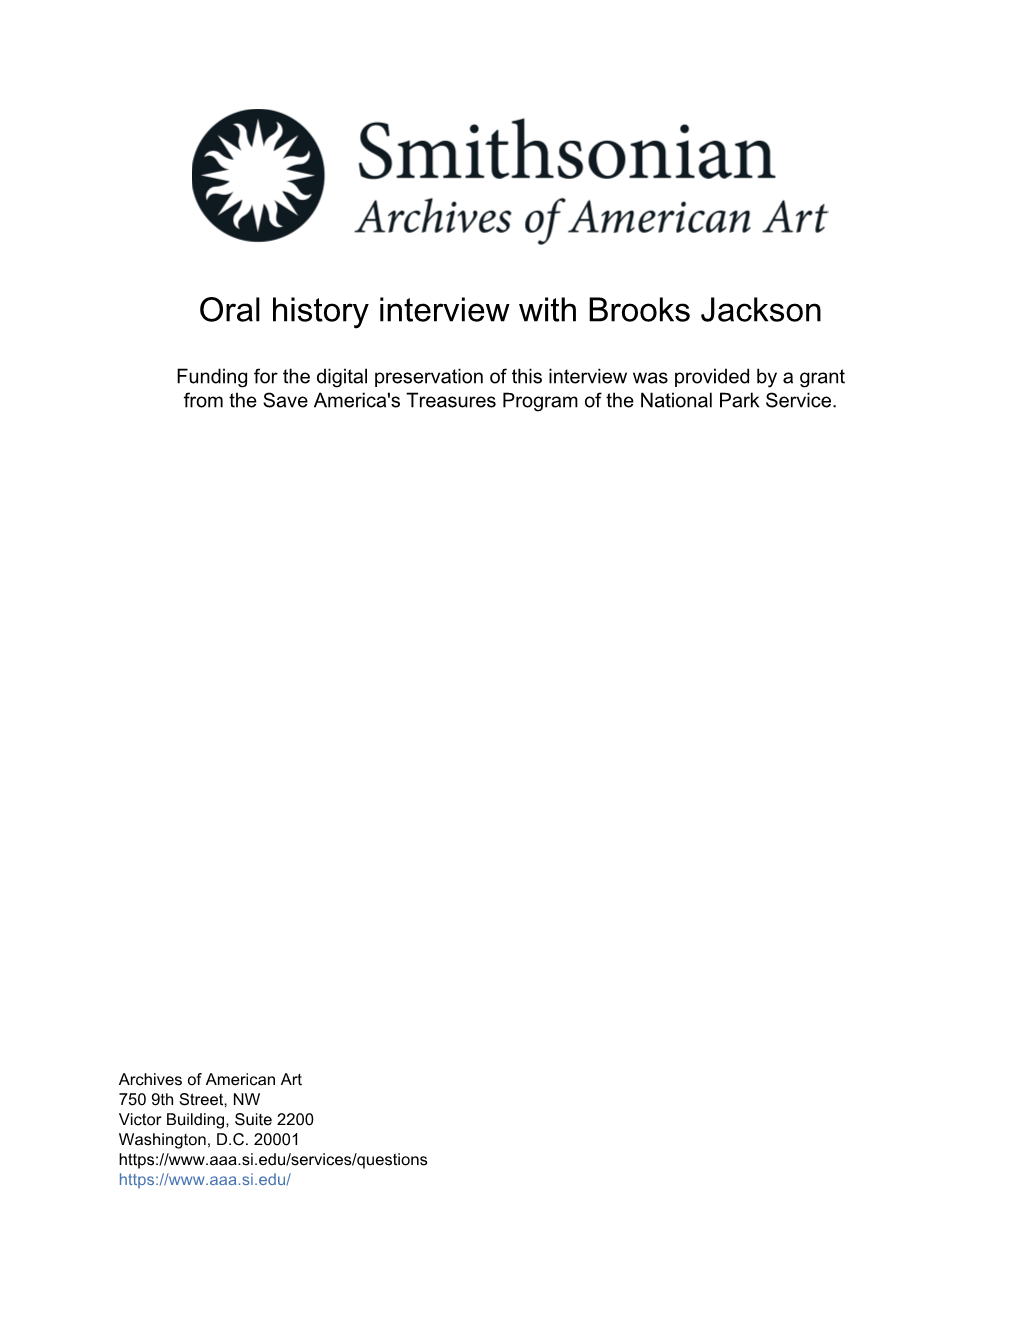 Oral History Interview with Brooks Jackson